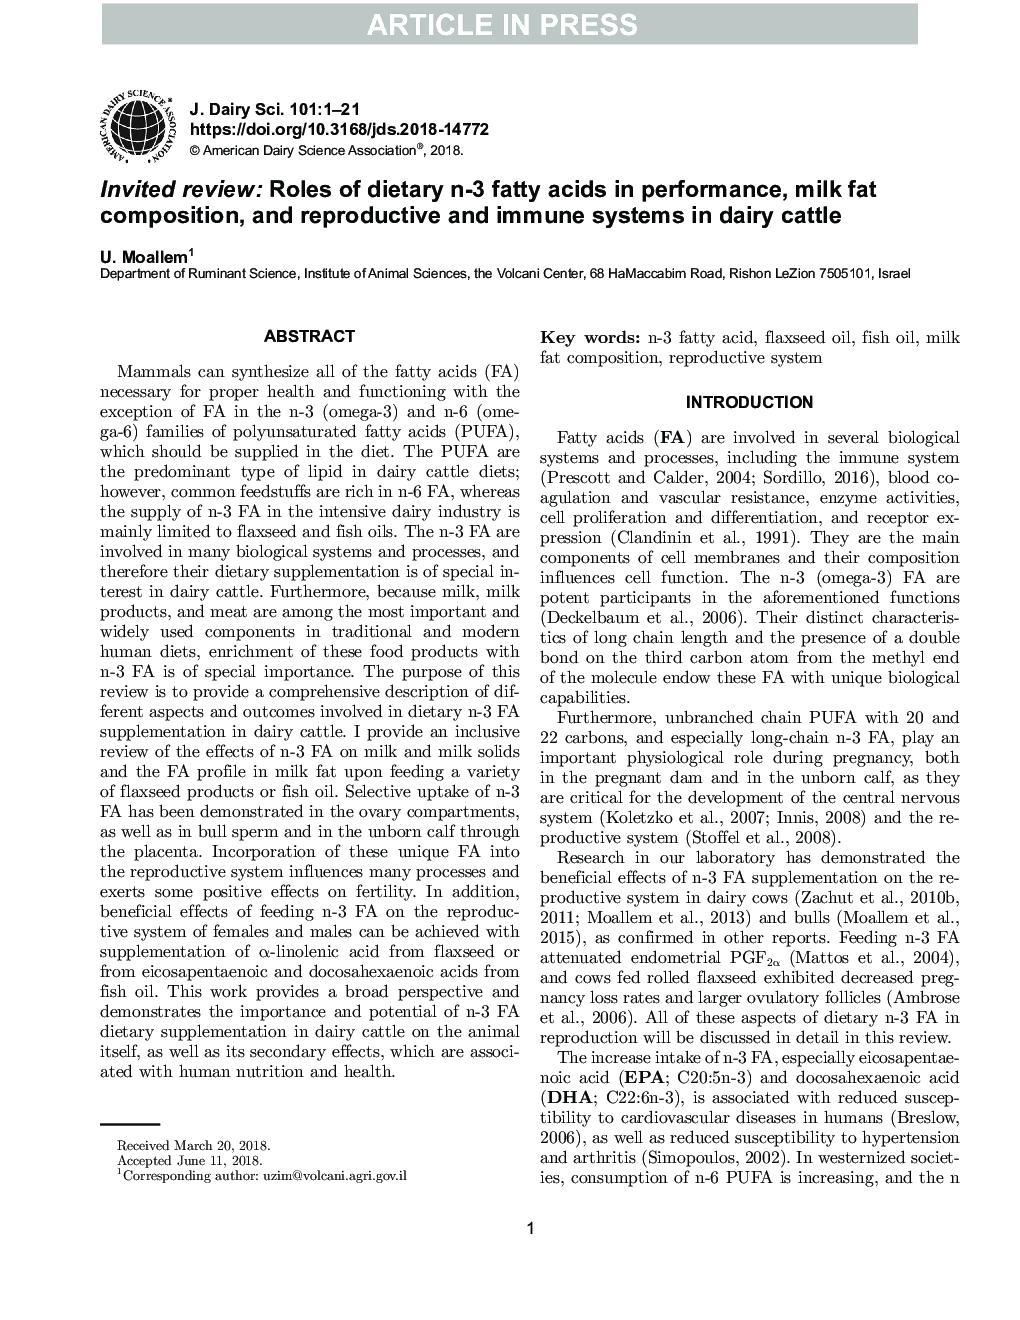 Invited review: Roles of dietary n-3 fatty acids in performance, milk fat composition, and reproductive and immune systems in dairy cattle